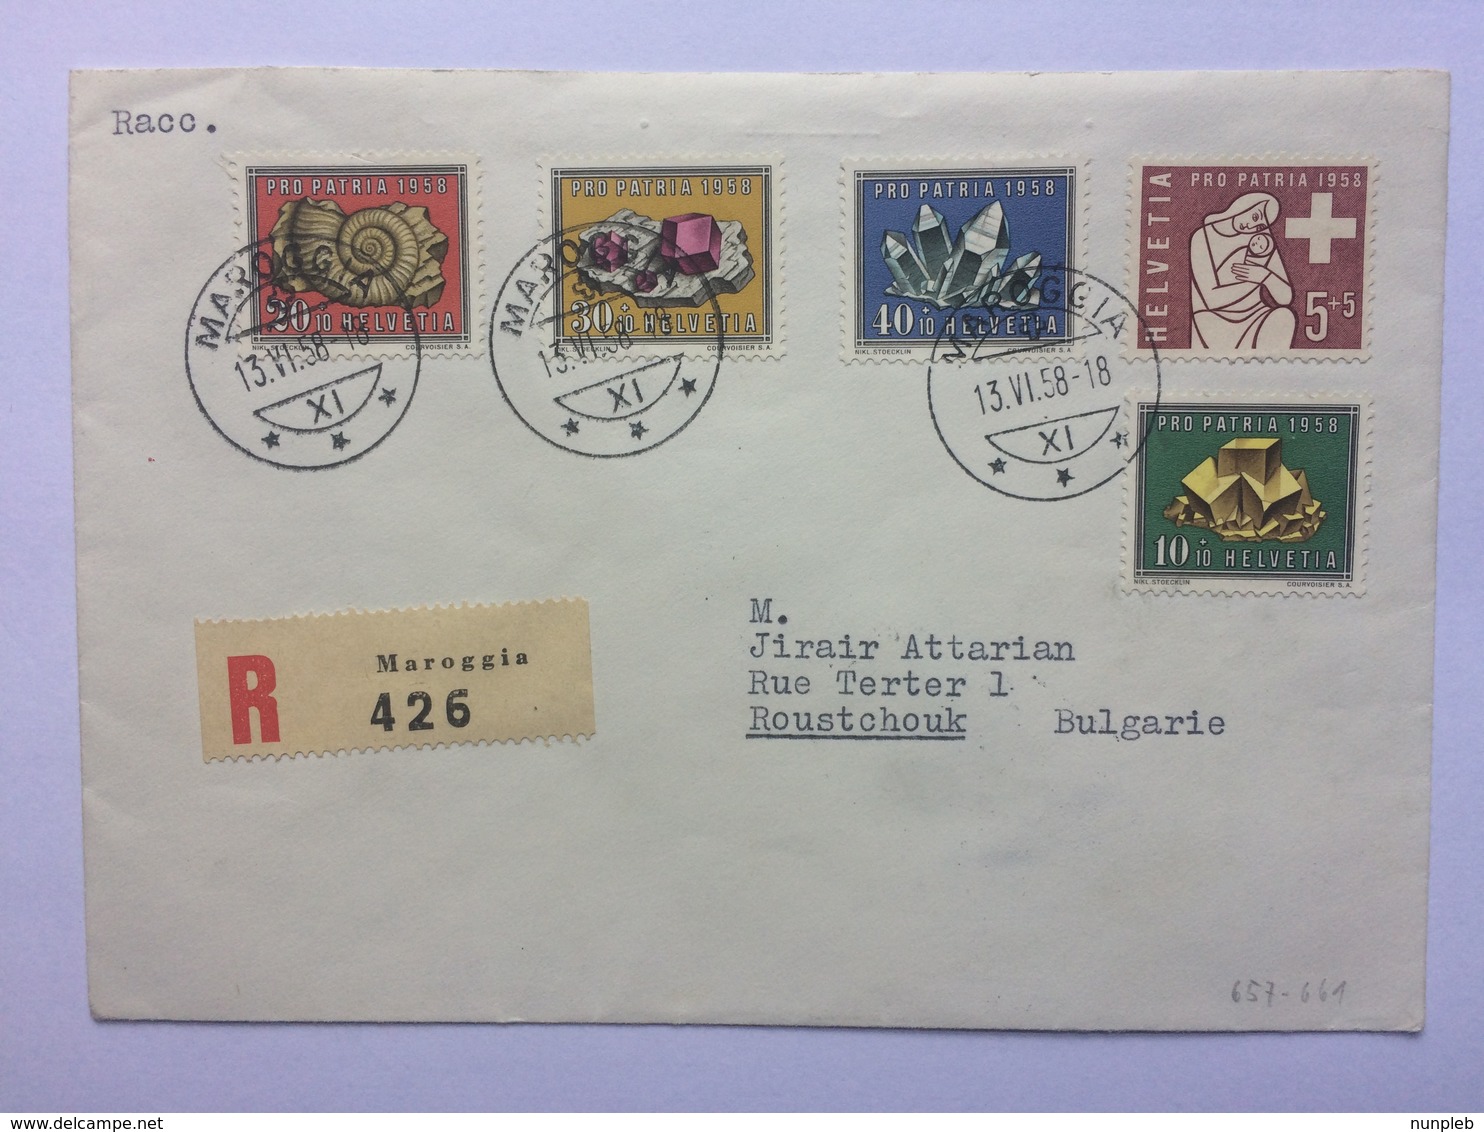 SWITZERLAND 1958 Cover Tied With Pro Patria 1958 Set Registered Maroggia To Roustchouk Bulgaria - Covers & Documents